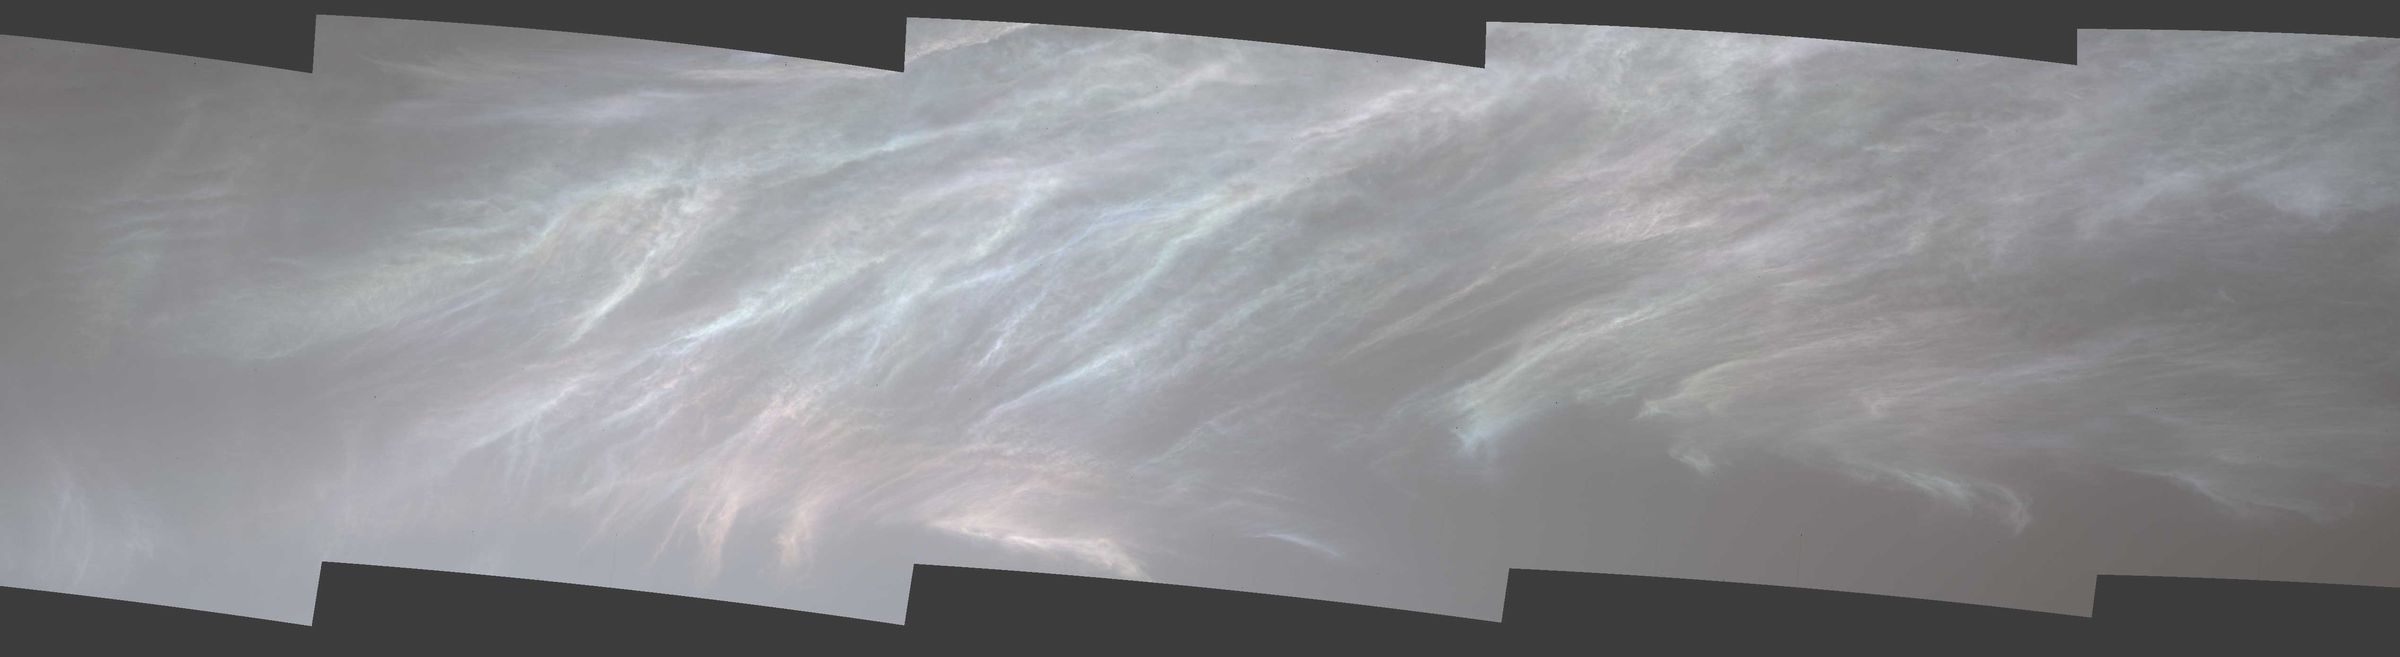 NASA’s Curiosity Mars rover spotted these iridescent, or “mother of pearl,” clouds on March 5th, the 3,048th Martian day, or sol, of its mission.